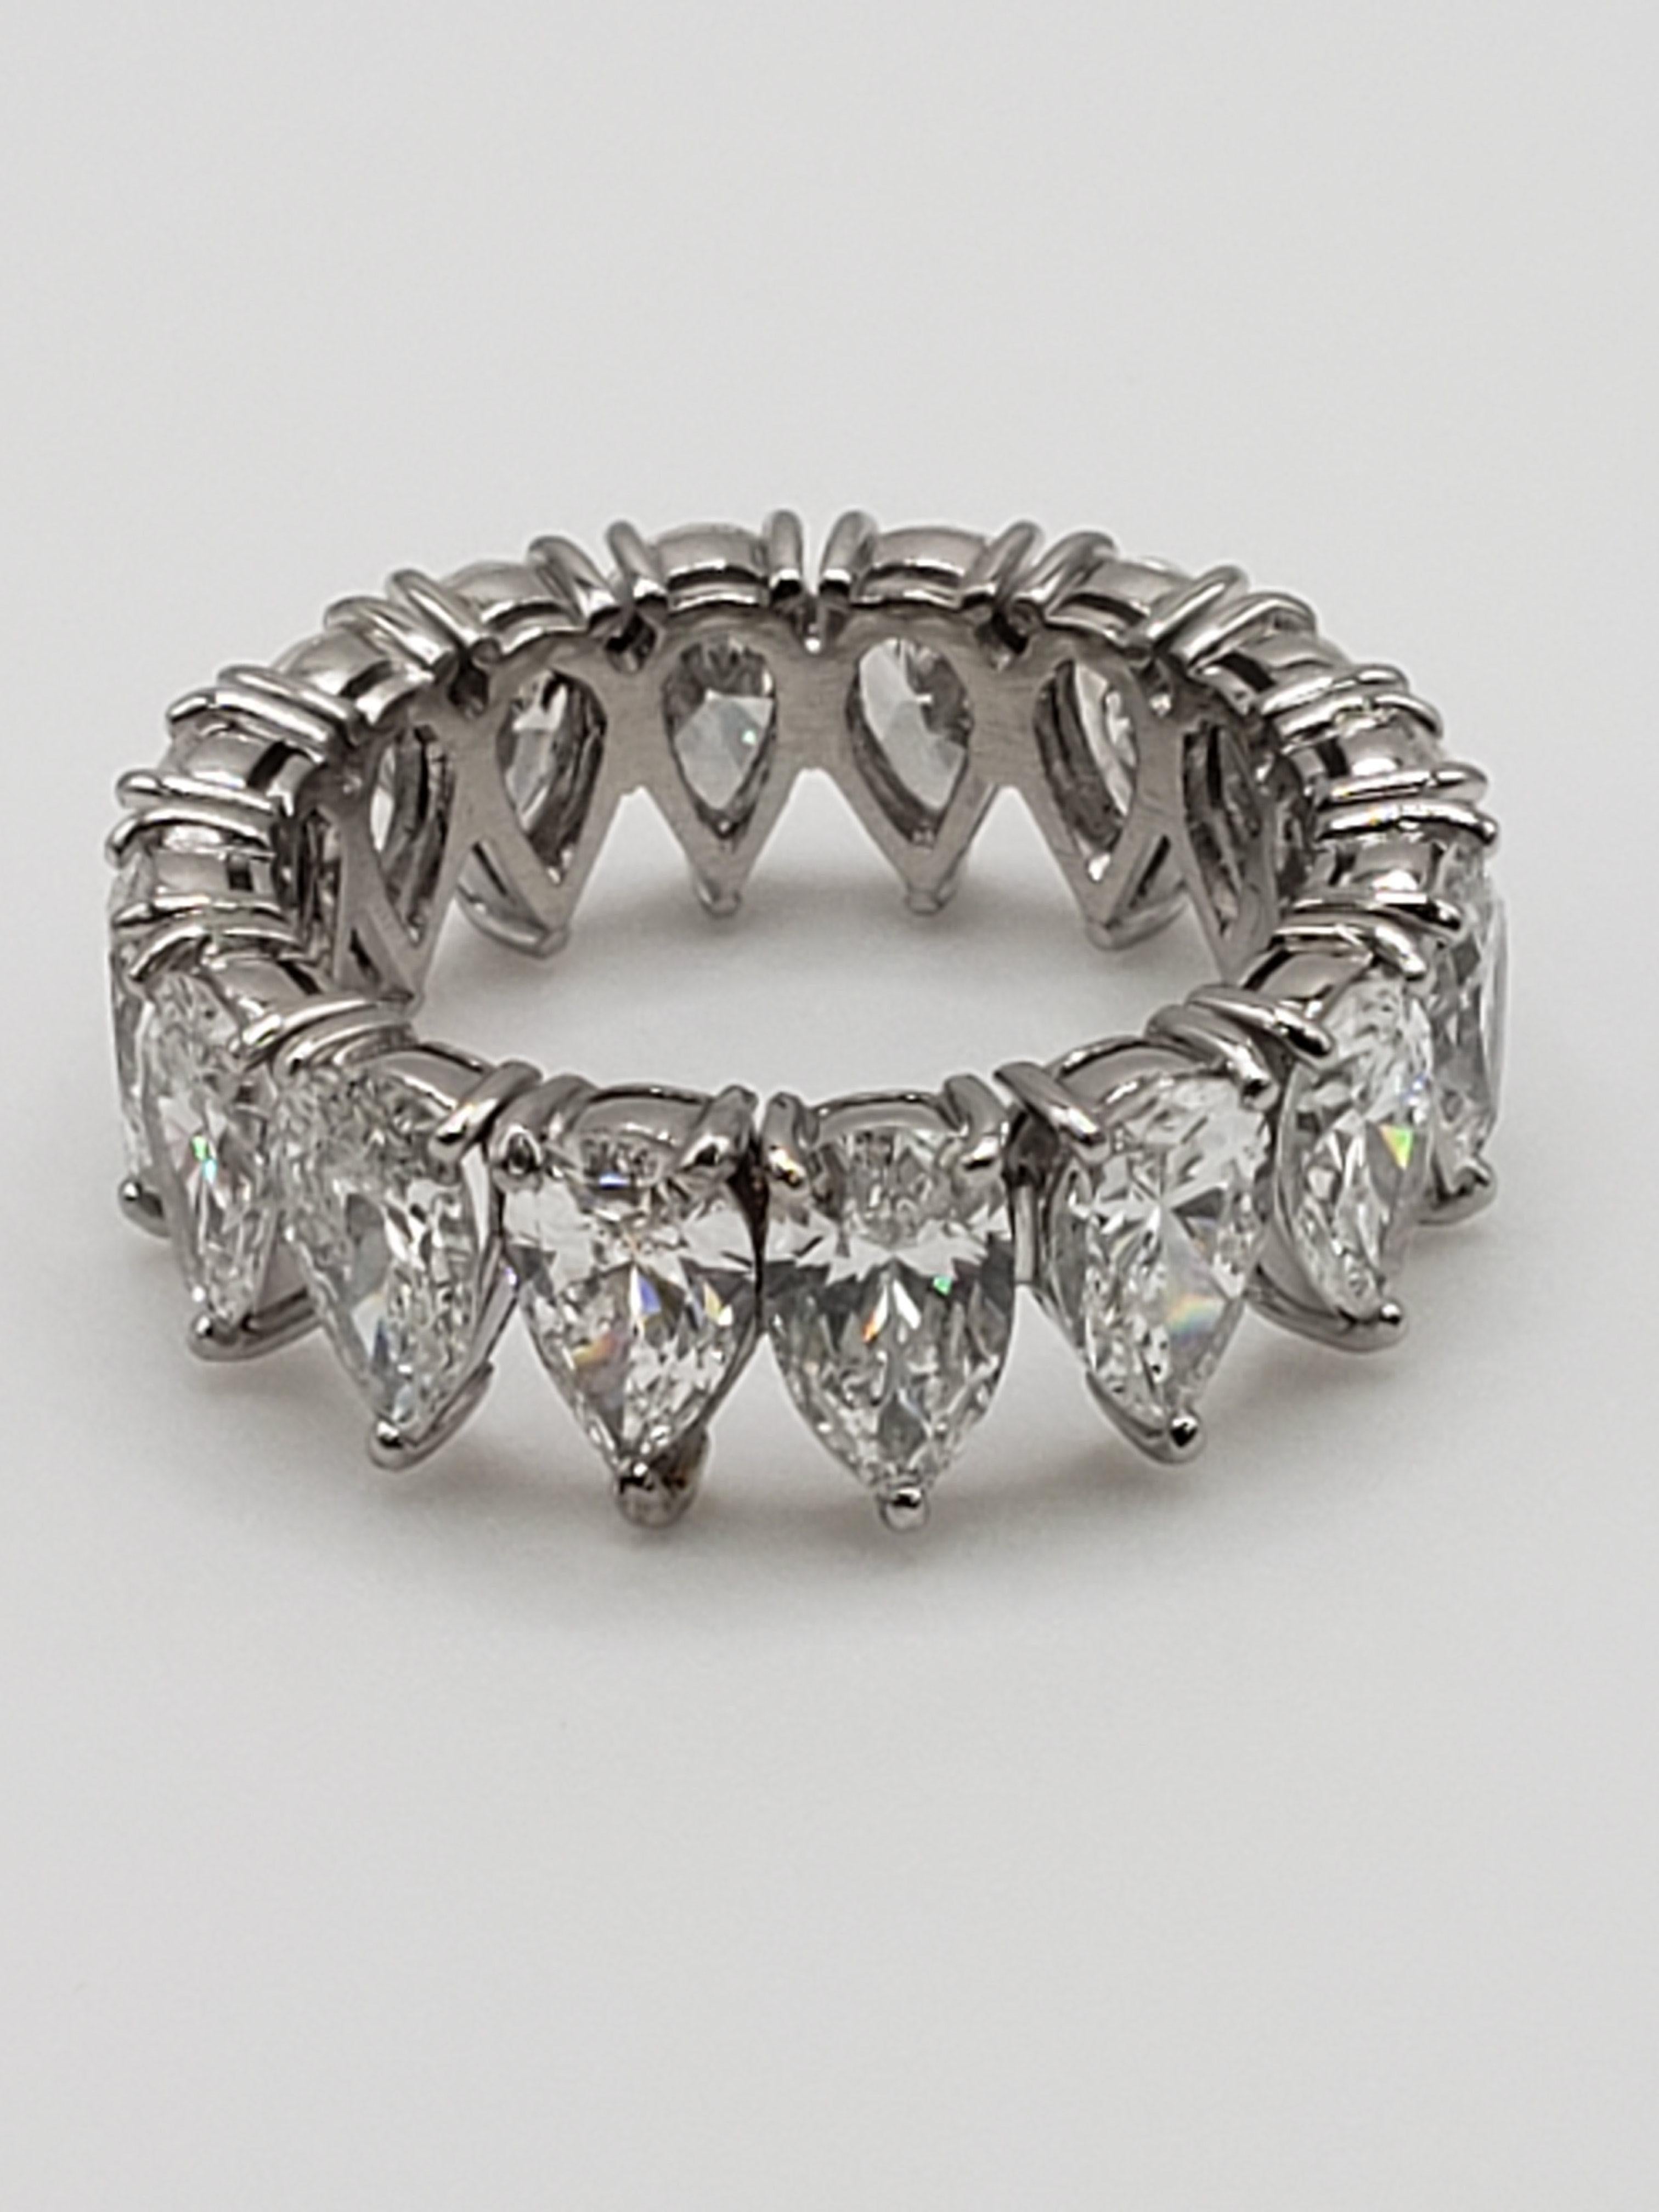 An authentic diamond and platinum ring, circa 1940's/50's (Retro), all handmade, forged in platinum, set with 16 tear-drop/pear shaped natural diamonds each measuring approximately 7.00 x 4.50 x 2.70 mm. The total Carat weight is approximately 8,